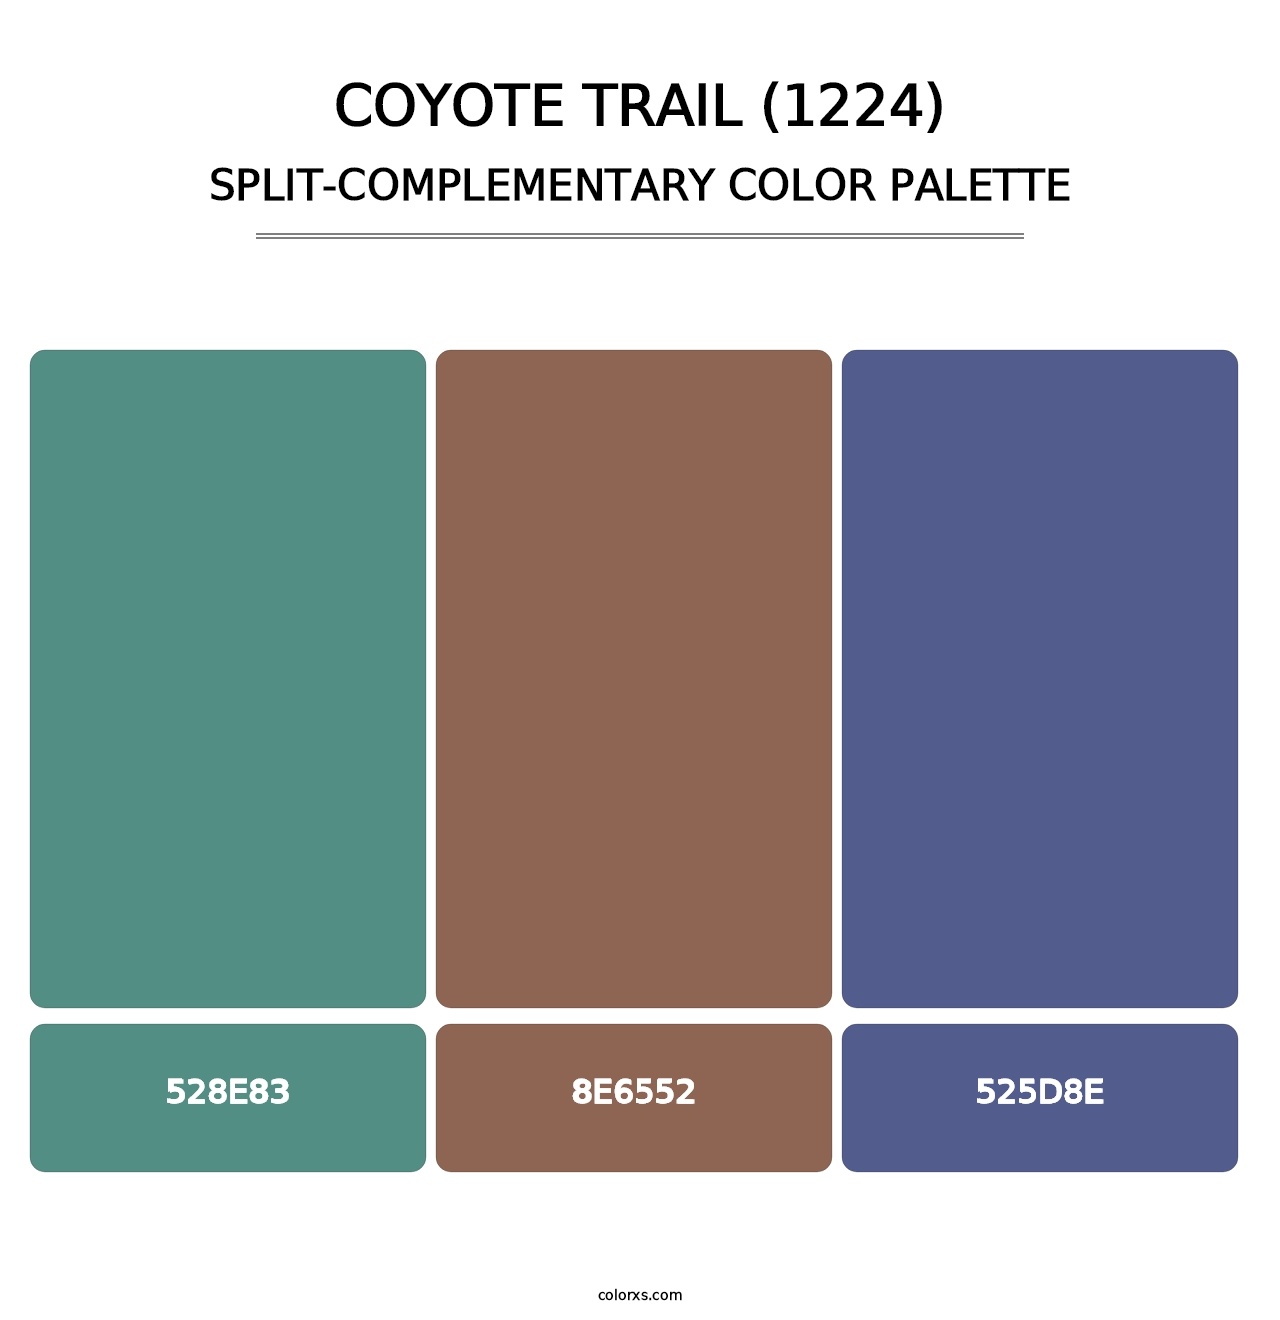 Coyote Trail (1224) - Split-Complementary Color Palette